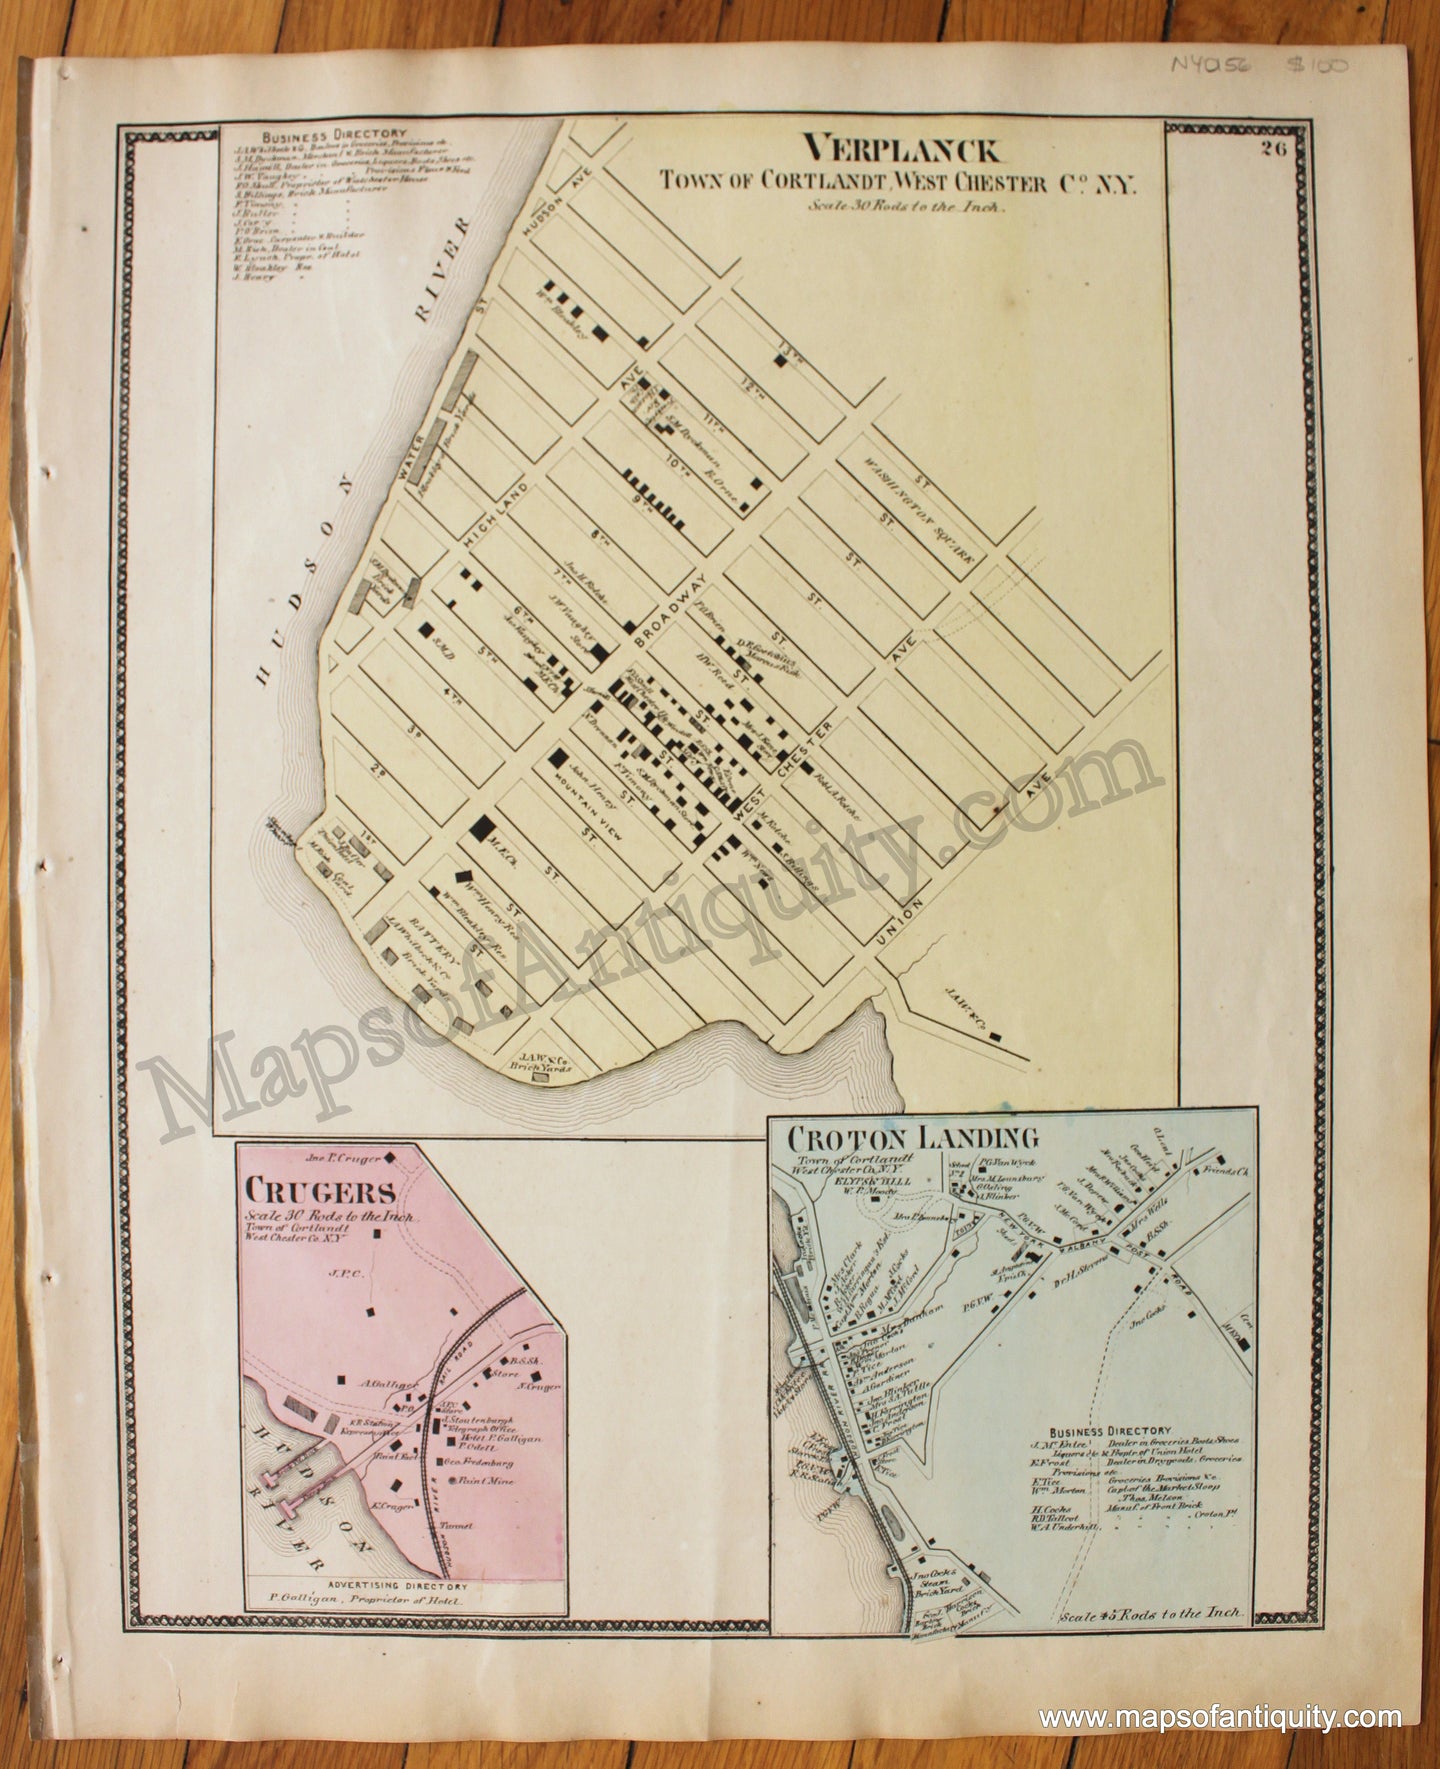 Antique-Map-Verplanck-Town-of-Cortlandt-West-Chester-Co.-N.Y.-(with-insets-of-Crugers-and-Croton-Landing)